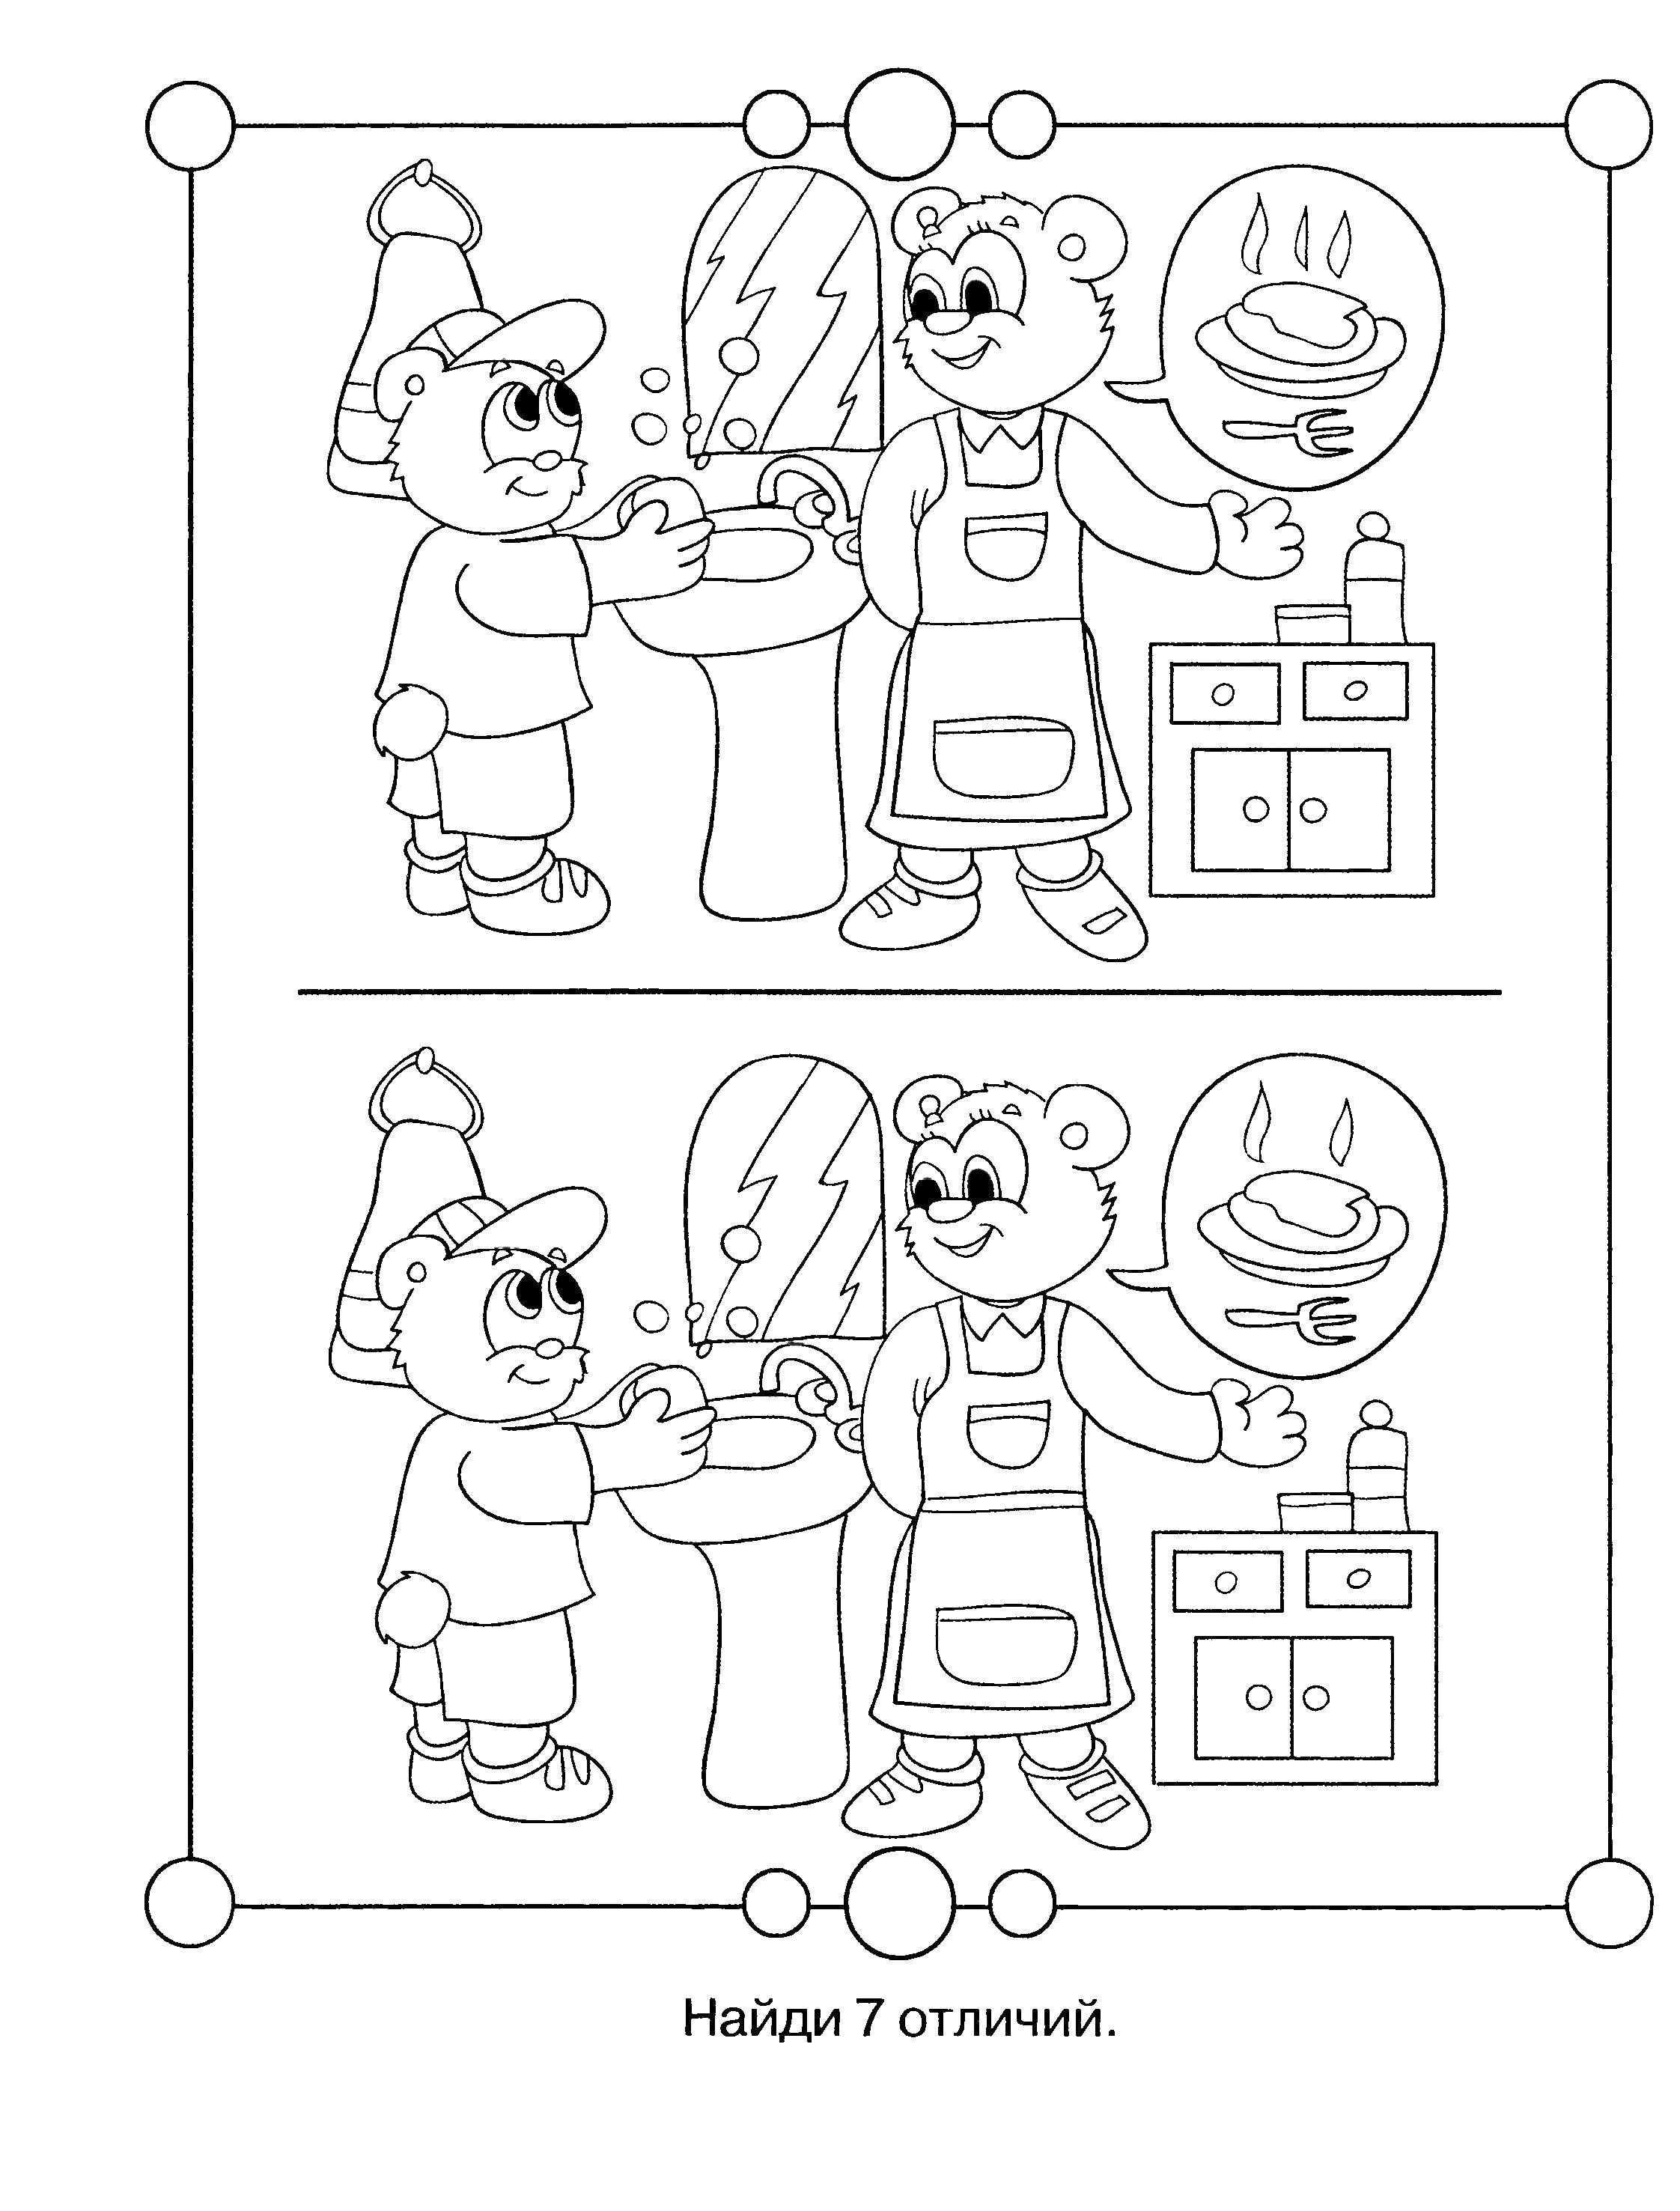 Coloring What are the differences?. Category riddles for kids. Tags:  Teaching coloring, logic.